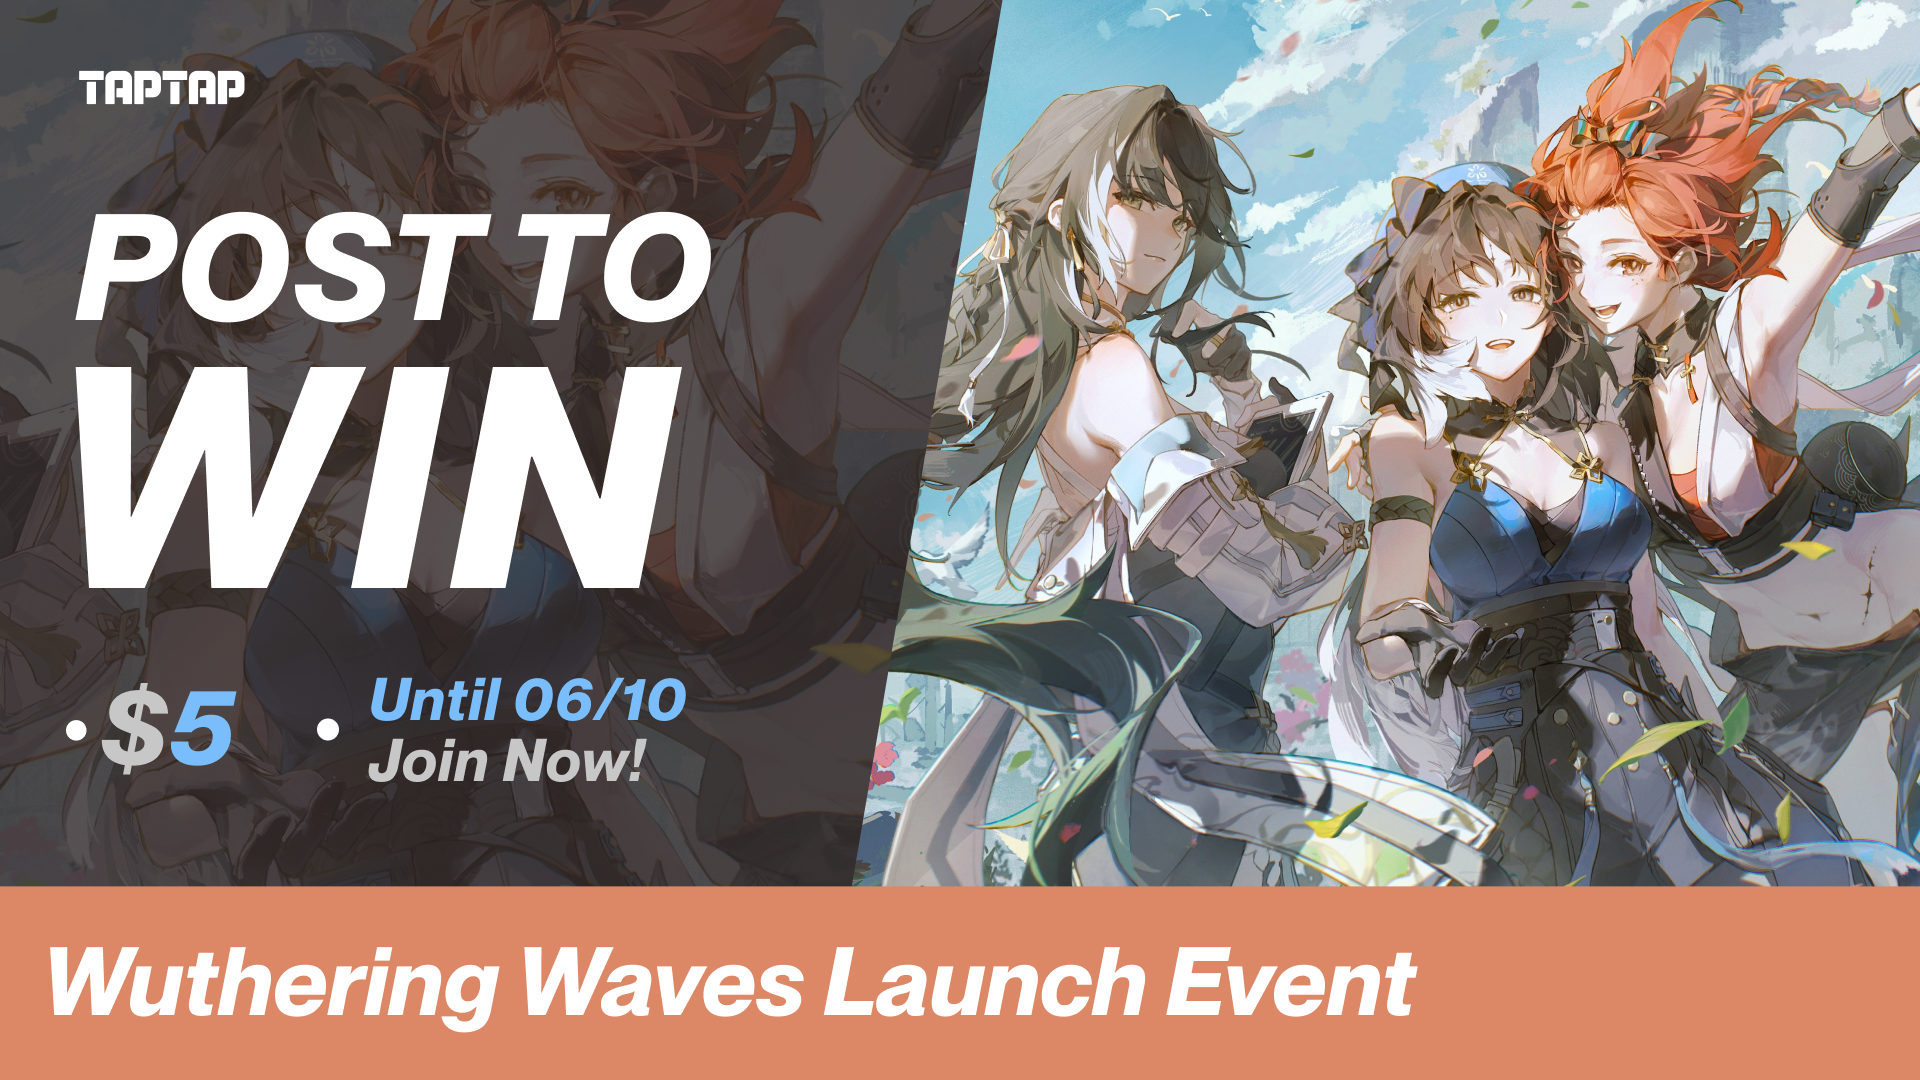 Celebrate the launch of Wuthering Waves! Post to win $5!